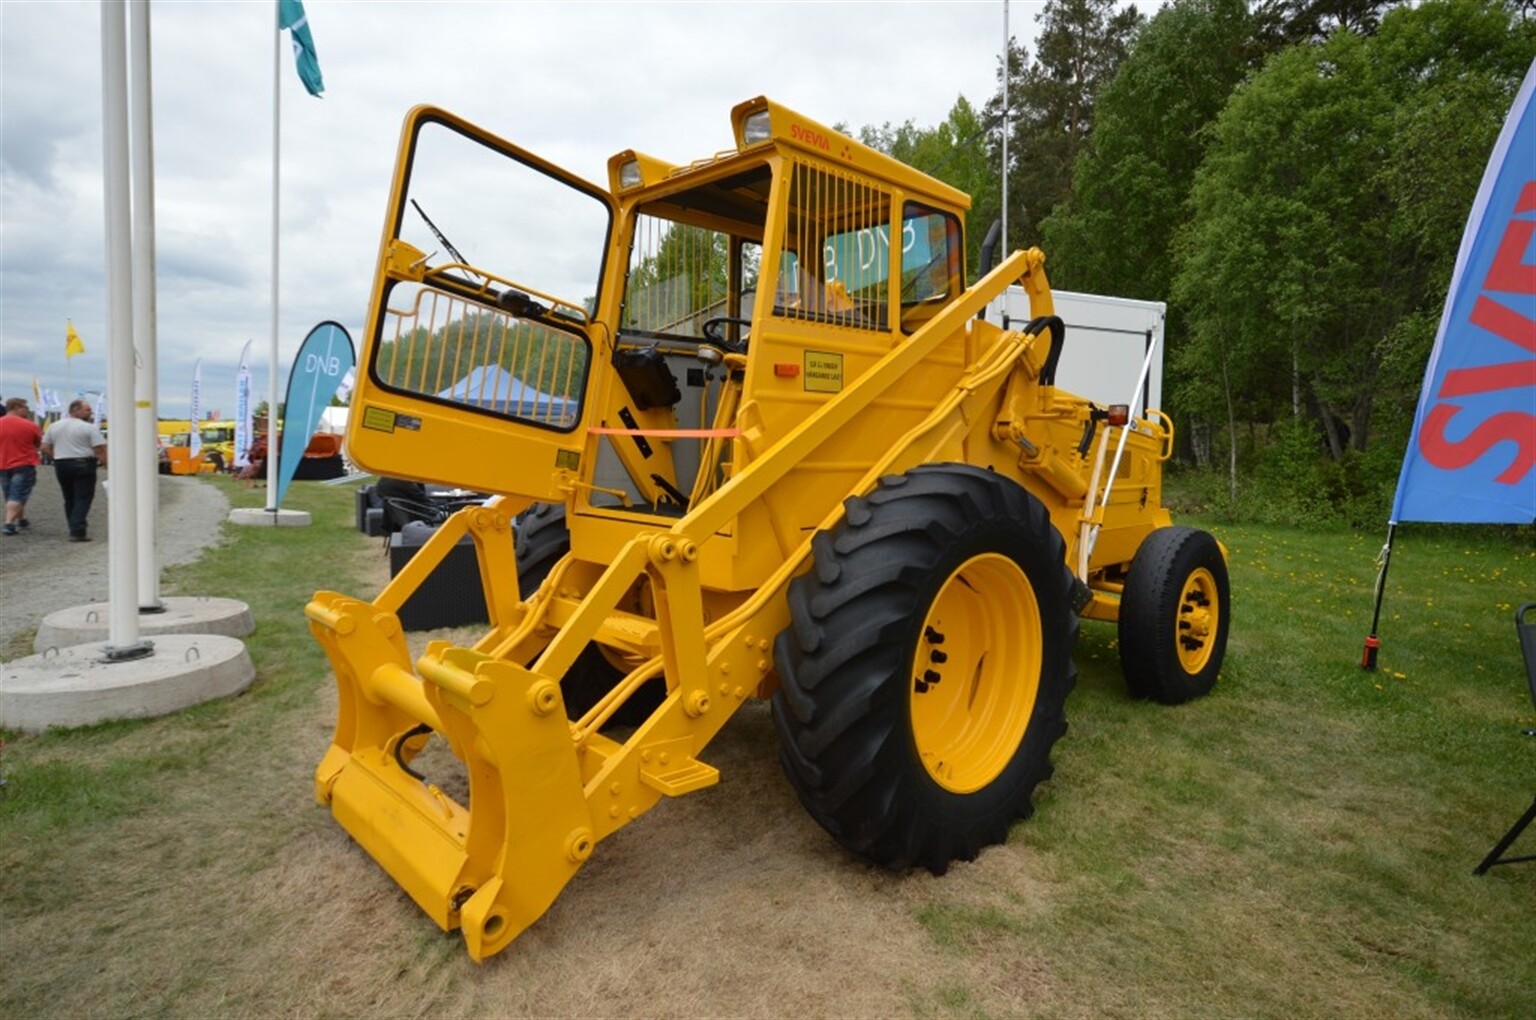 Classic restoration of an iconic Volvo Loader at MaskinExpo